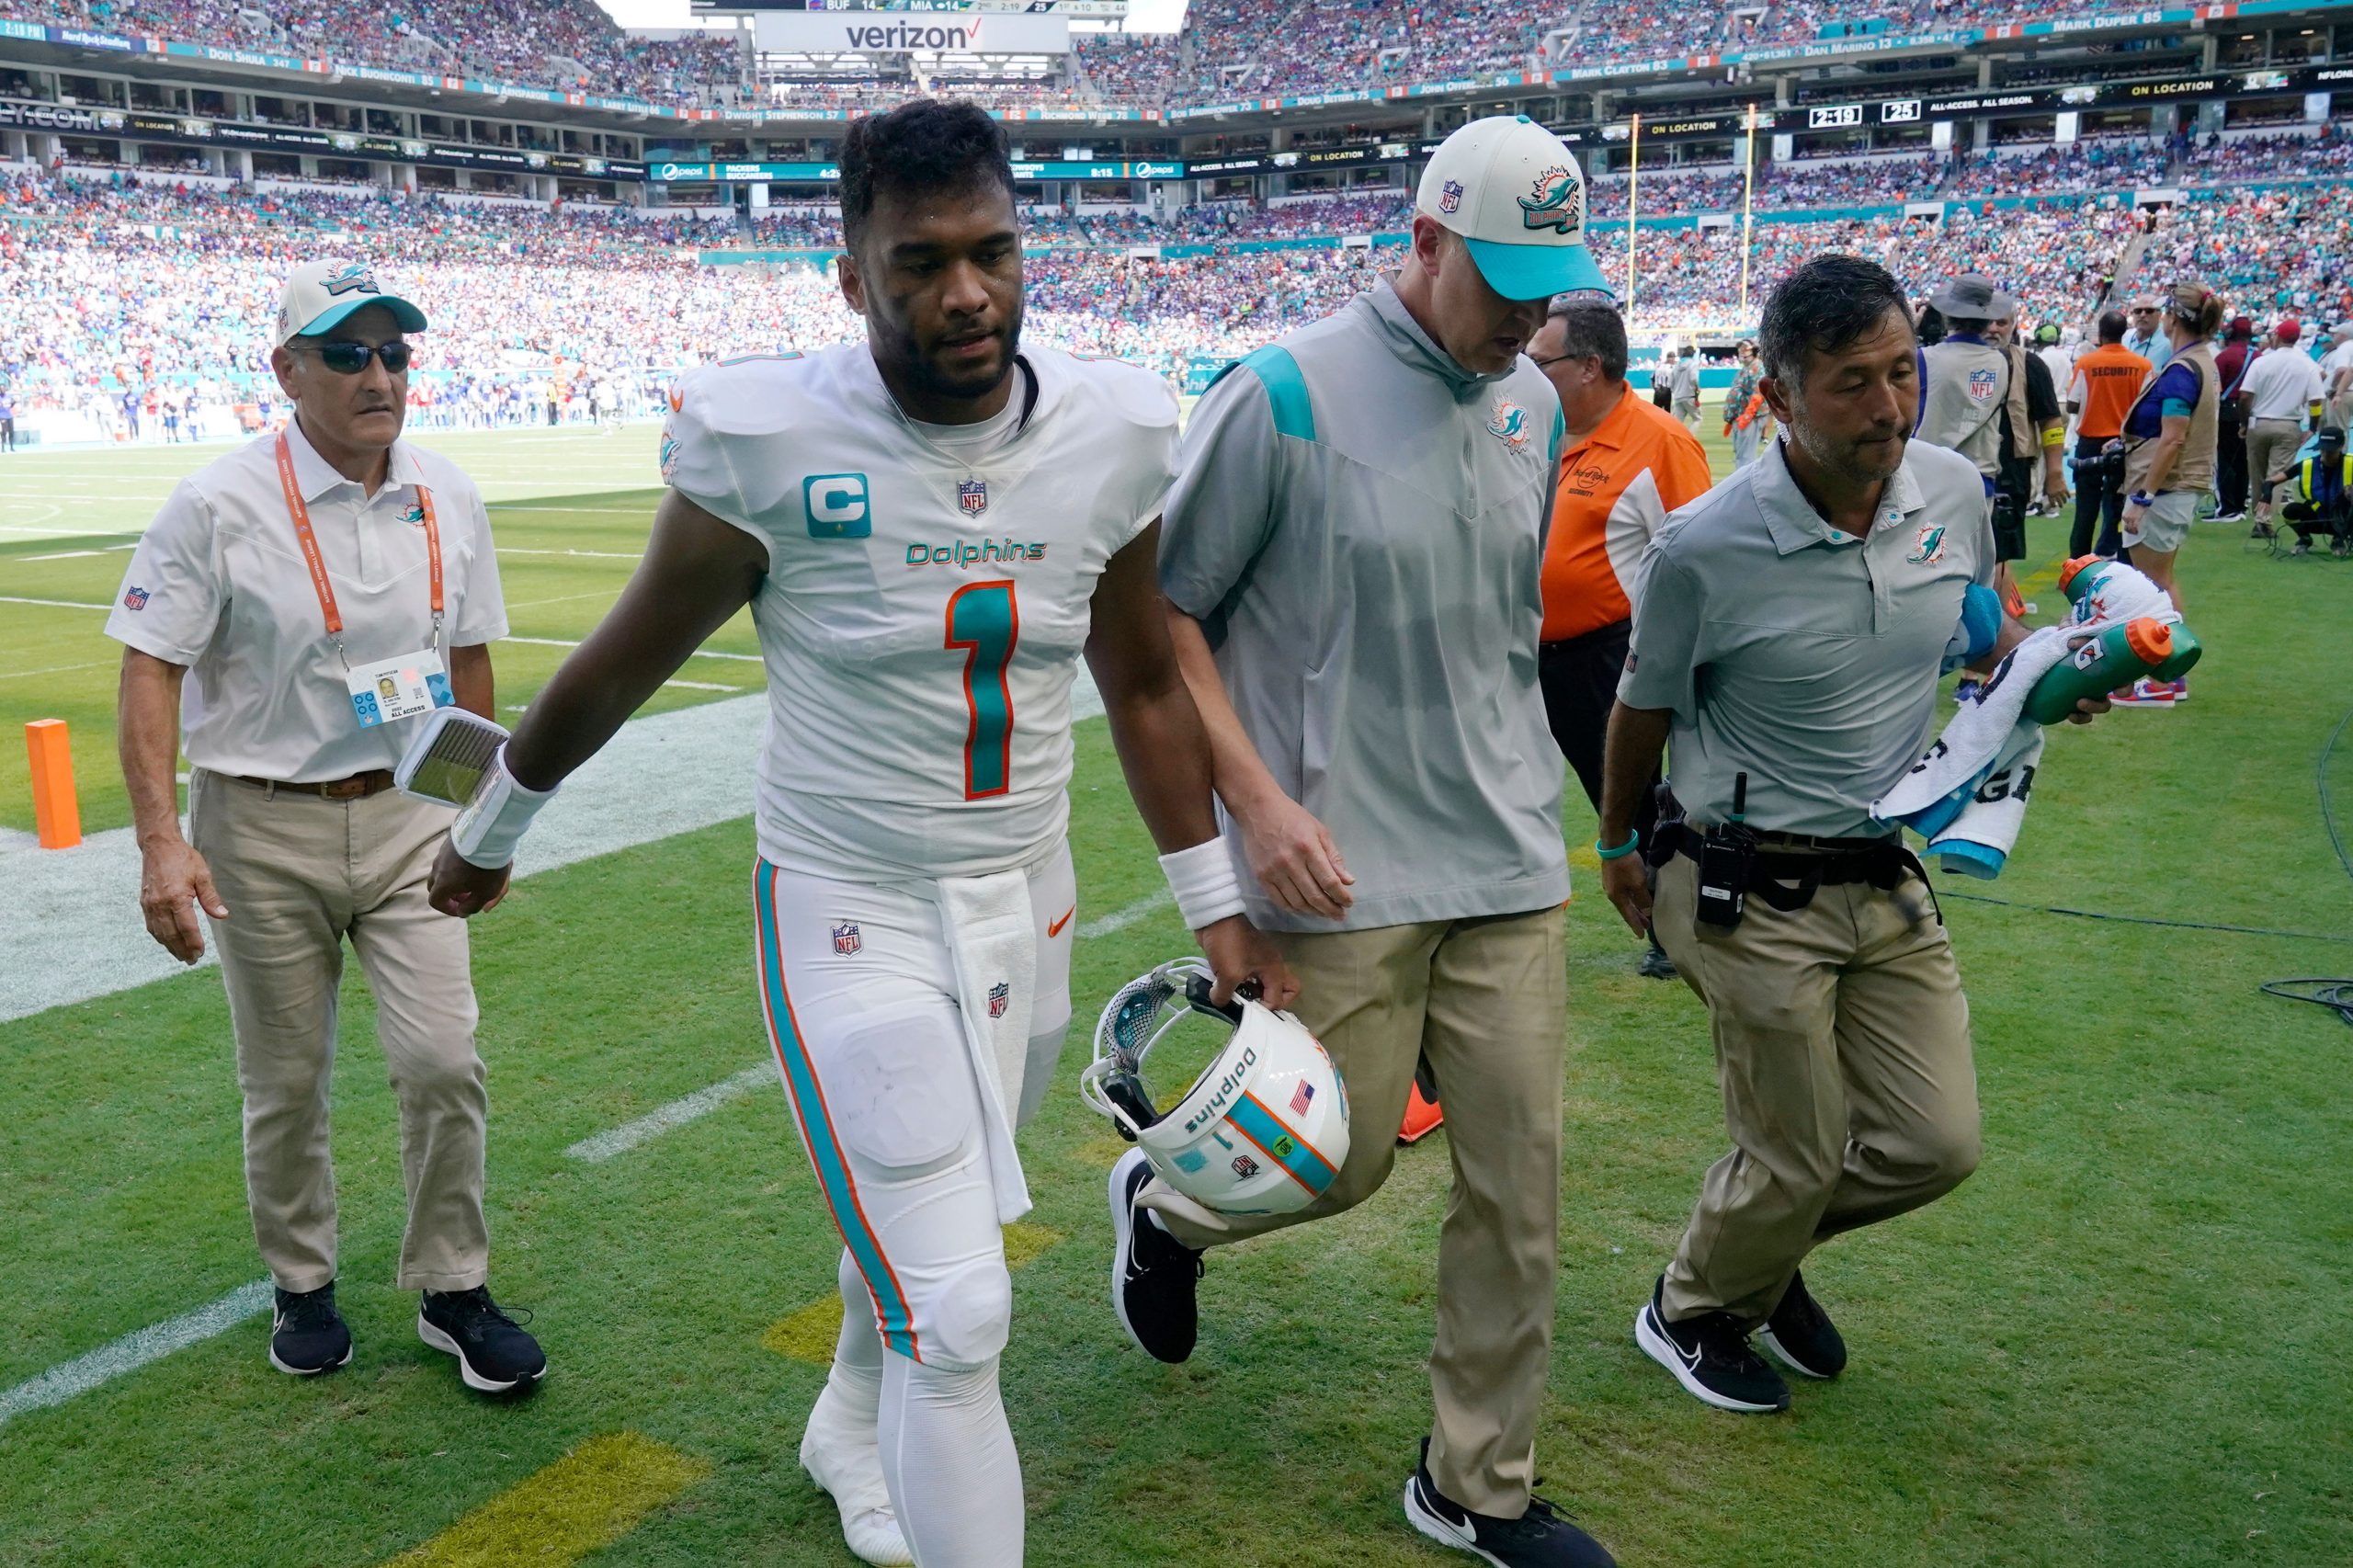 NFL 2022: Changes in Concussion Protocol after Miami Dolphins’ QB Tua Tagovailoa’s injury